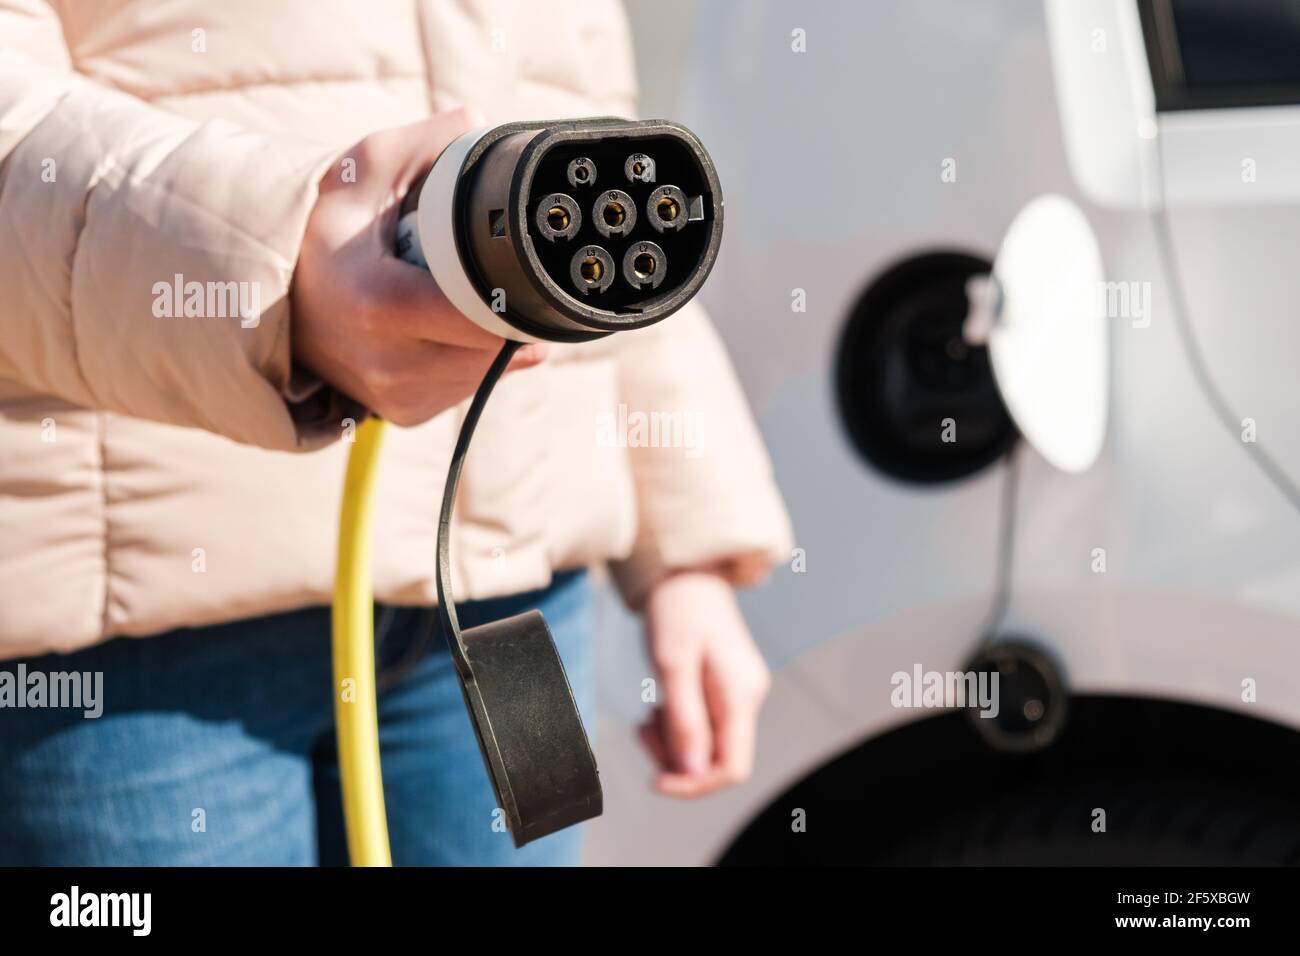 Car power charger in woman hand. Power supply for recharging of electric or EV car Stock Photo